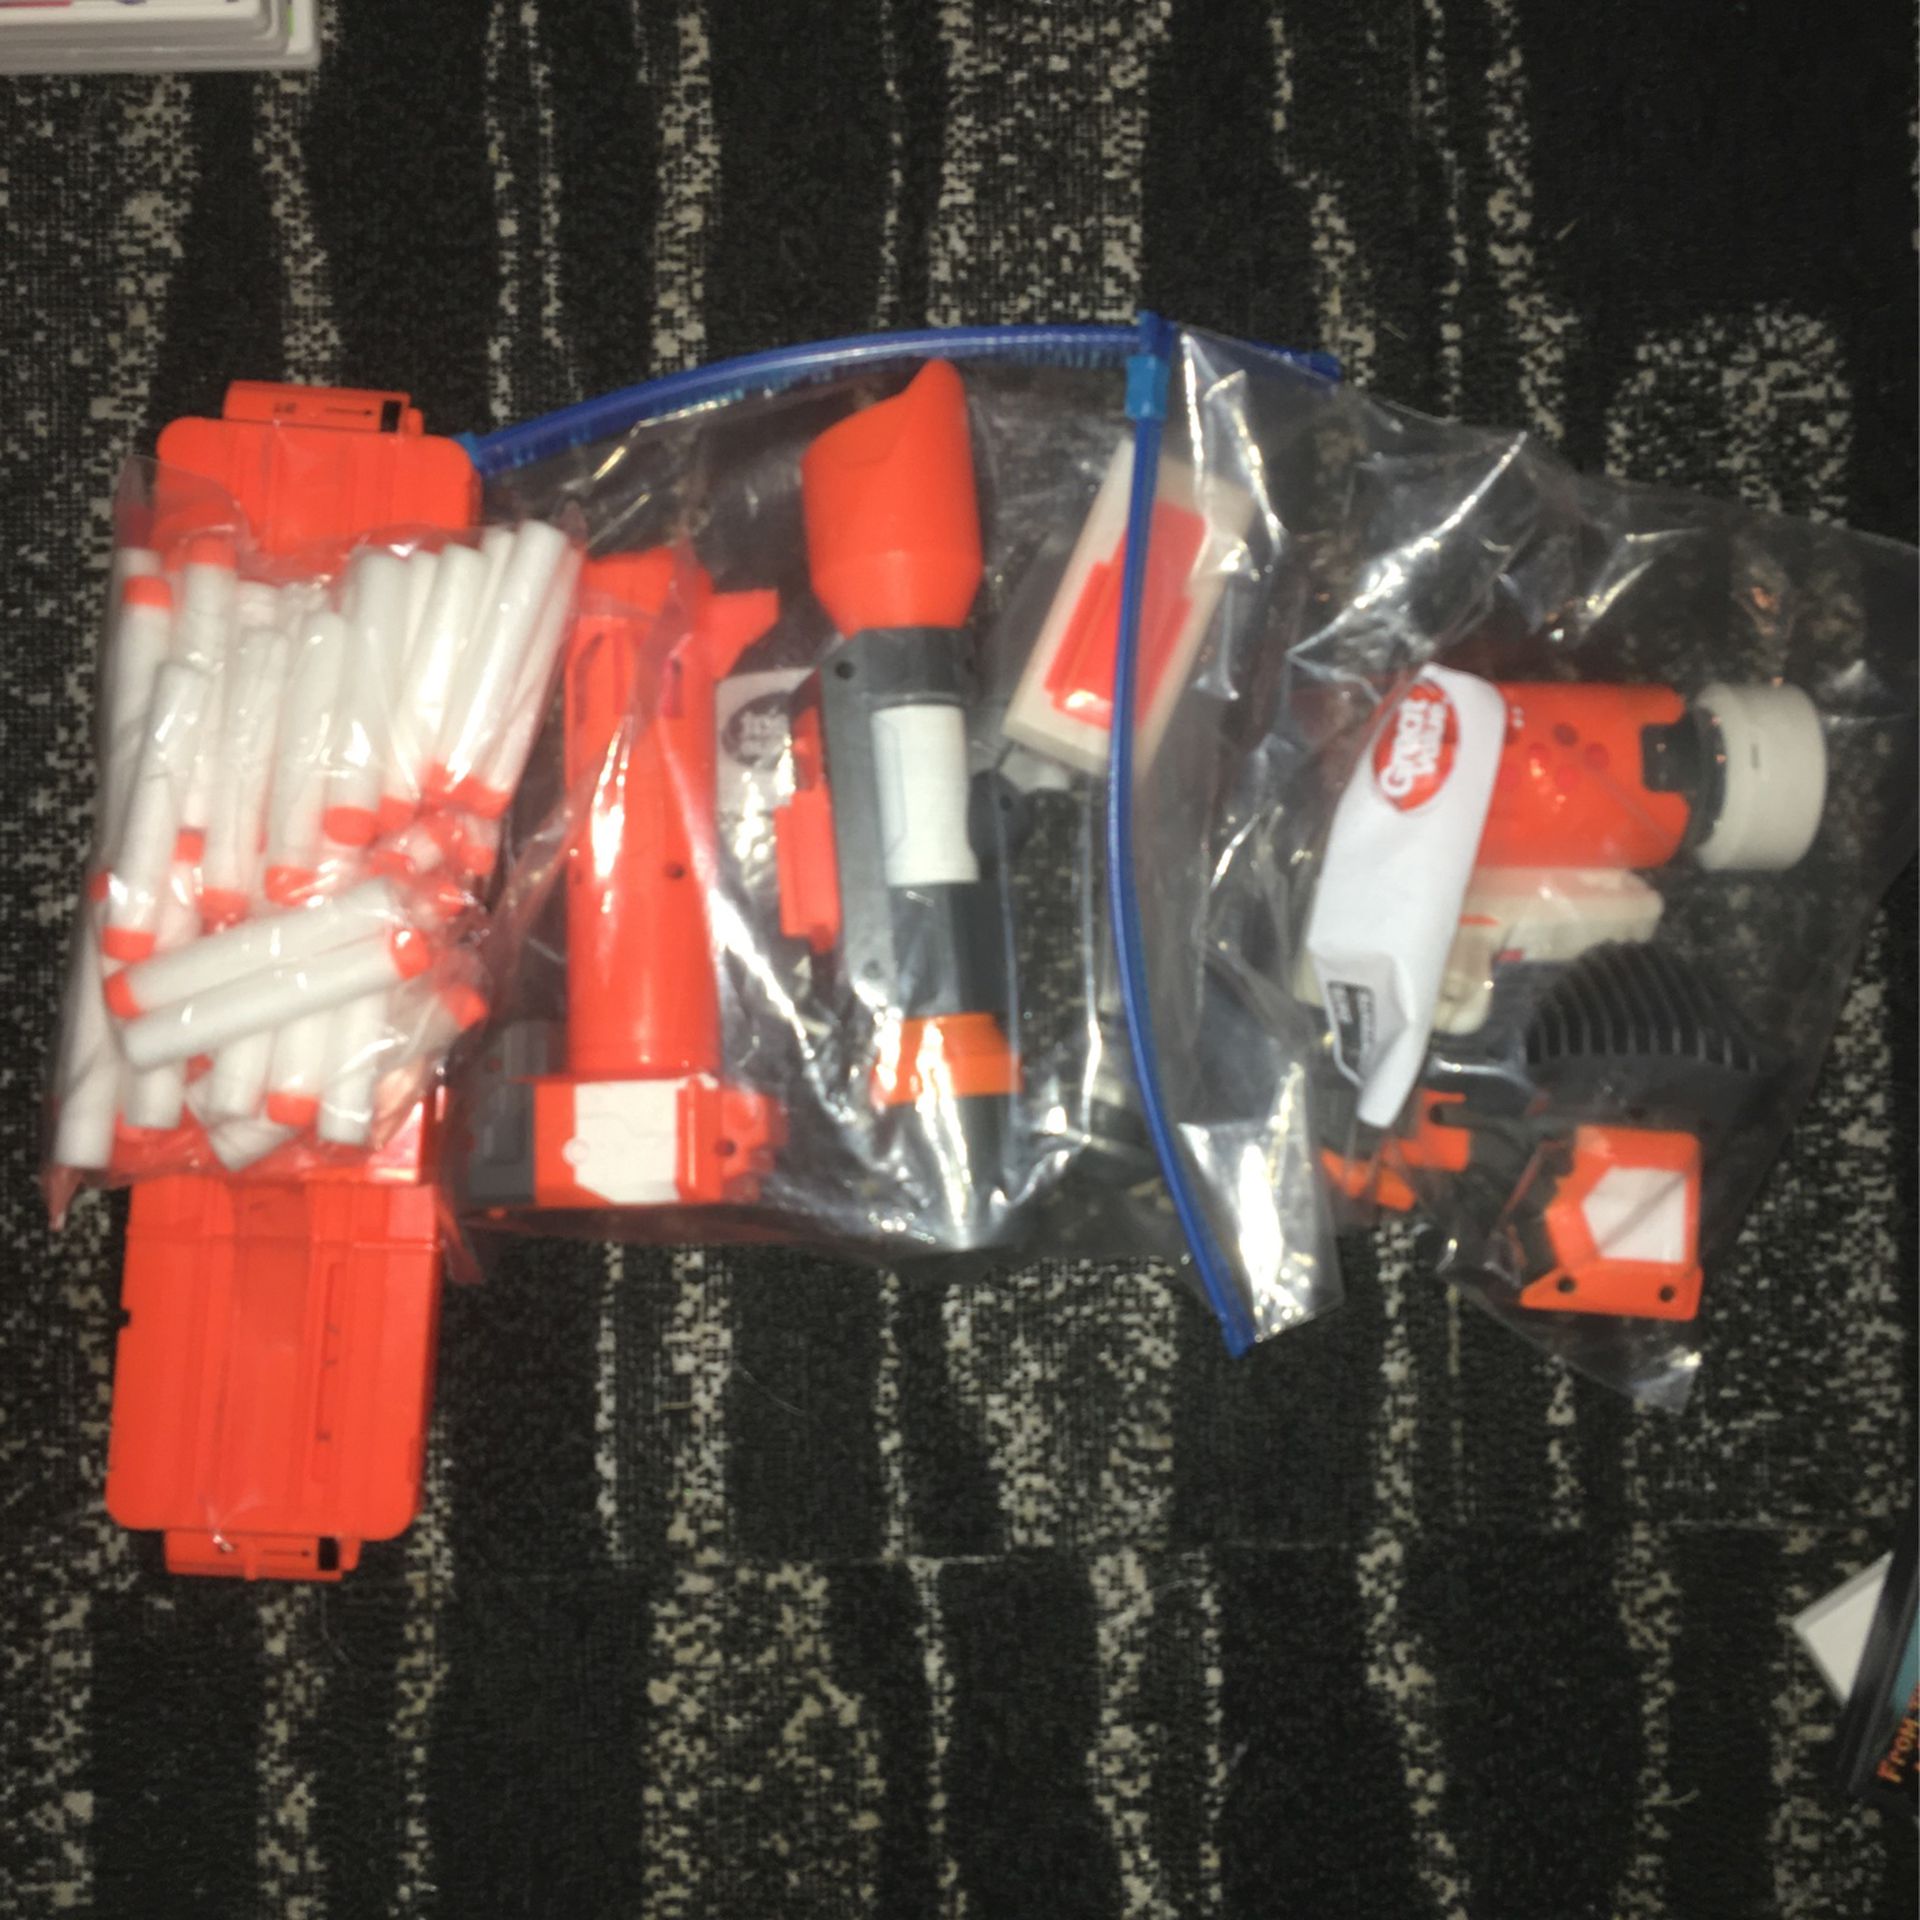 Nerf Gun Attachments And Ammo